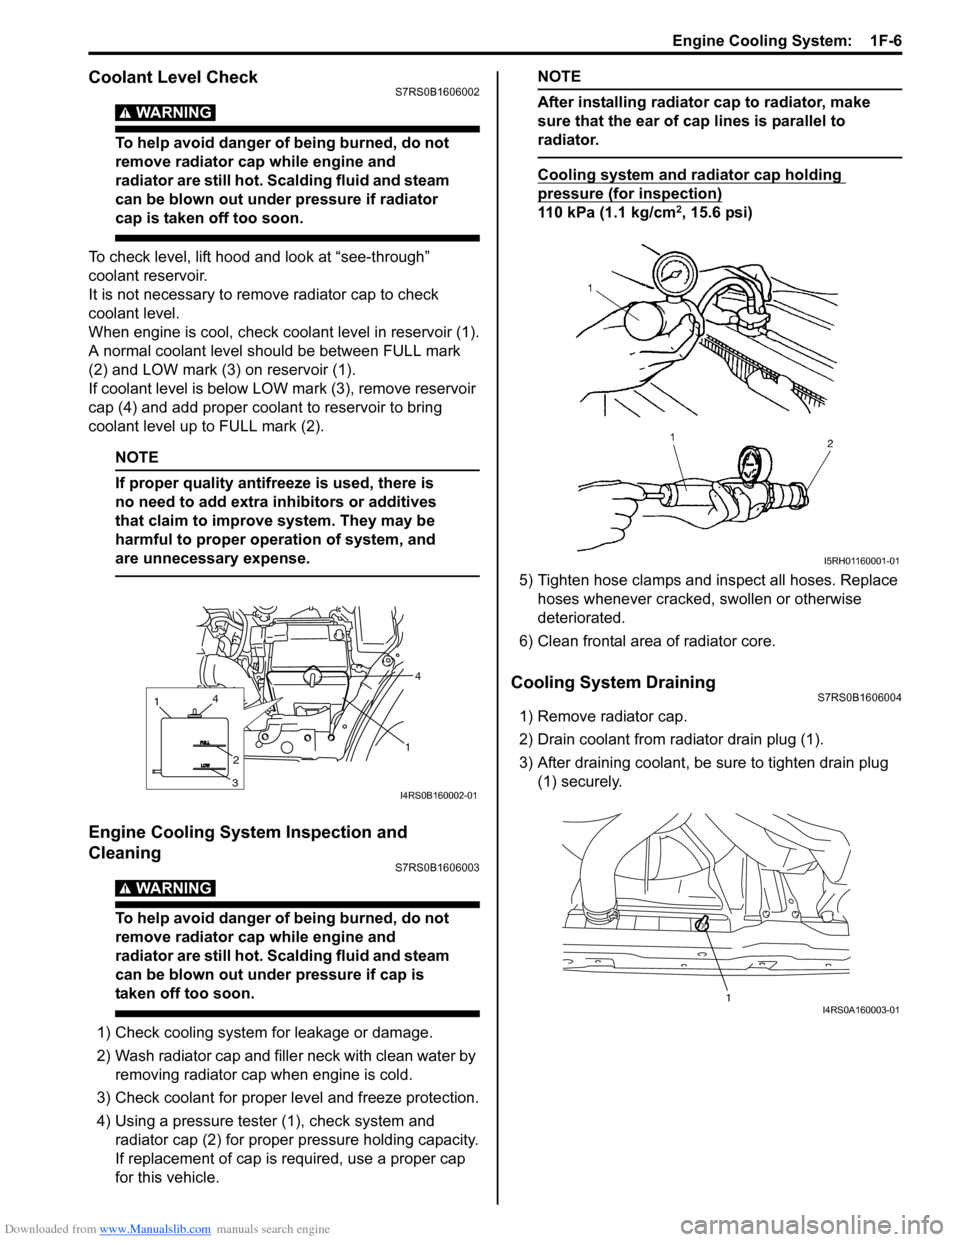 SUZUKI SWIFT 2004 2.G Service Workshop Manual Downloaded from www.Manualslib.com manuals search engine Engine Cooling System:  1F-6
Coolant Level CheckS7RS0B1606002
WARNING! 
To help avoid danger of being burned, do not 
remove radiator cap while